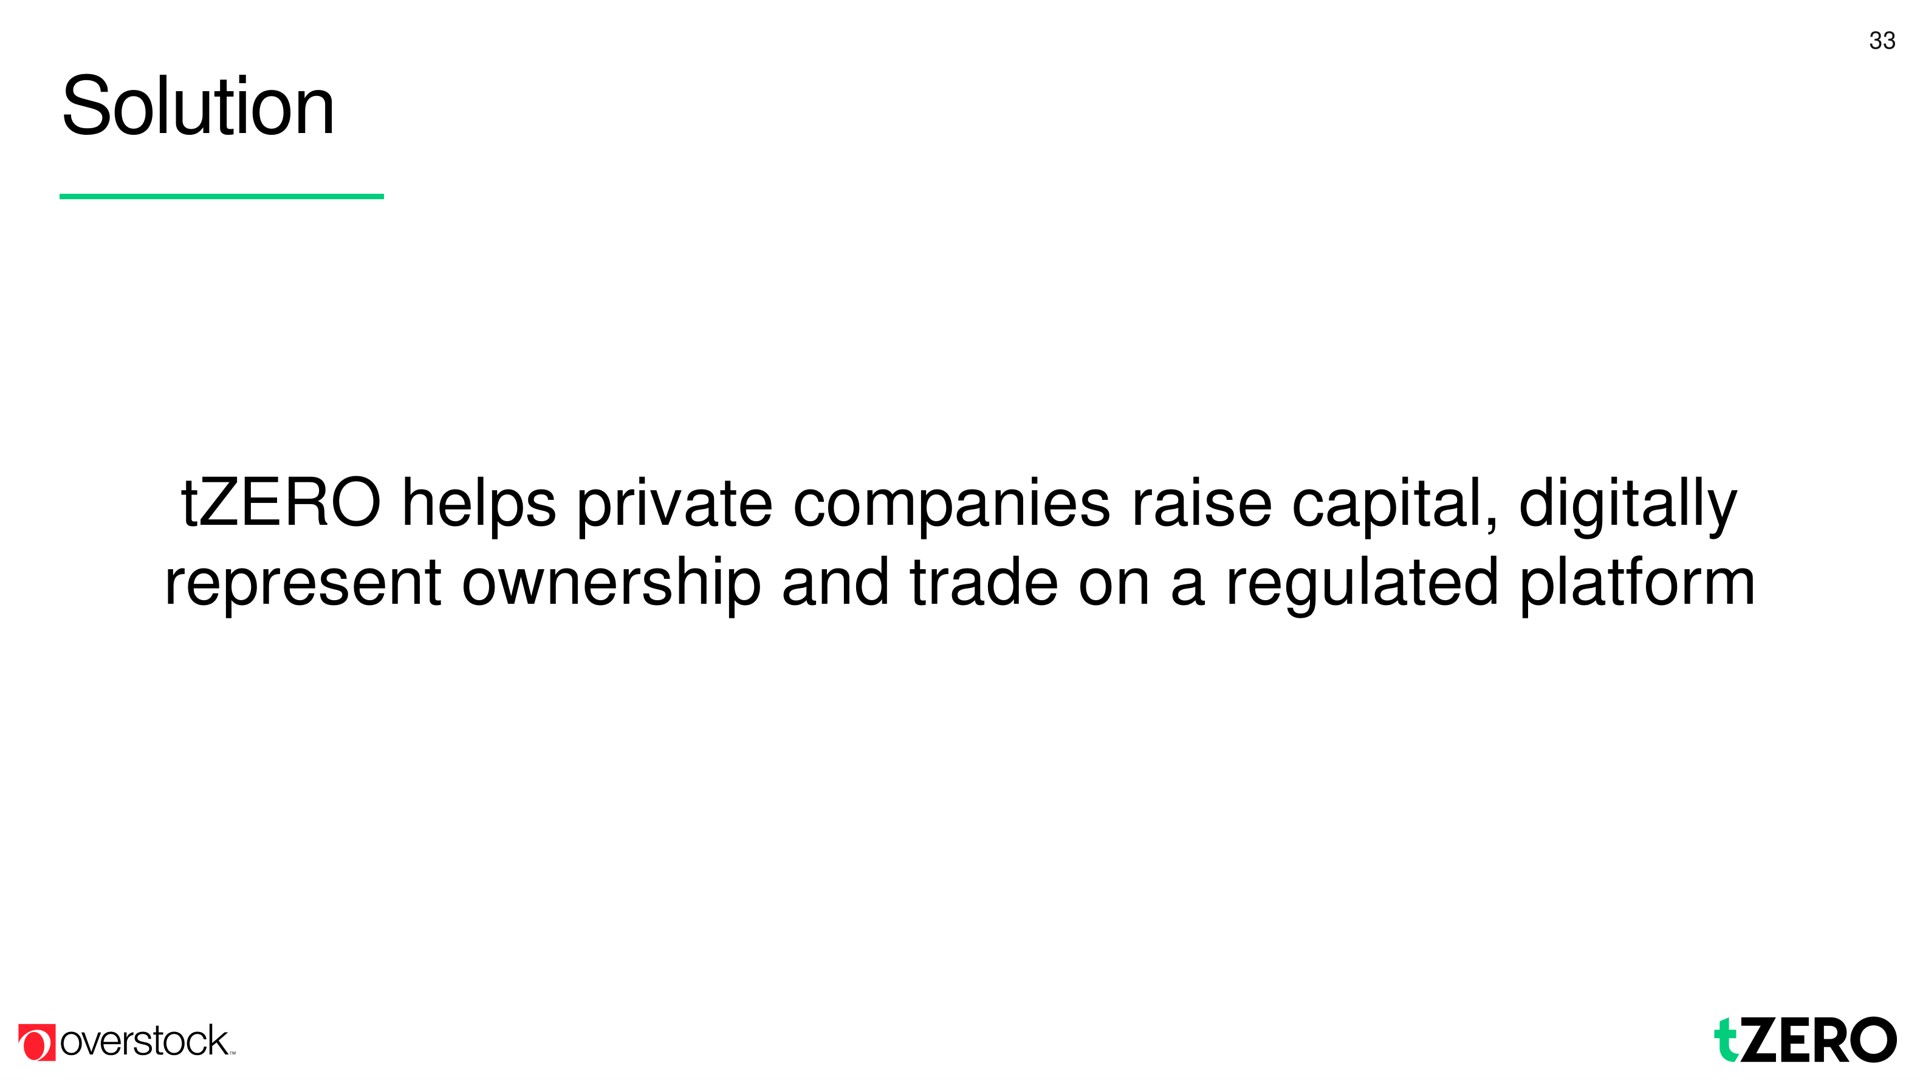 solution helps private companies raise capital digitally represent ownership and trade on a regulated platform | Overstock